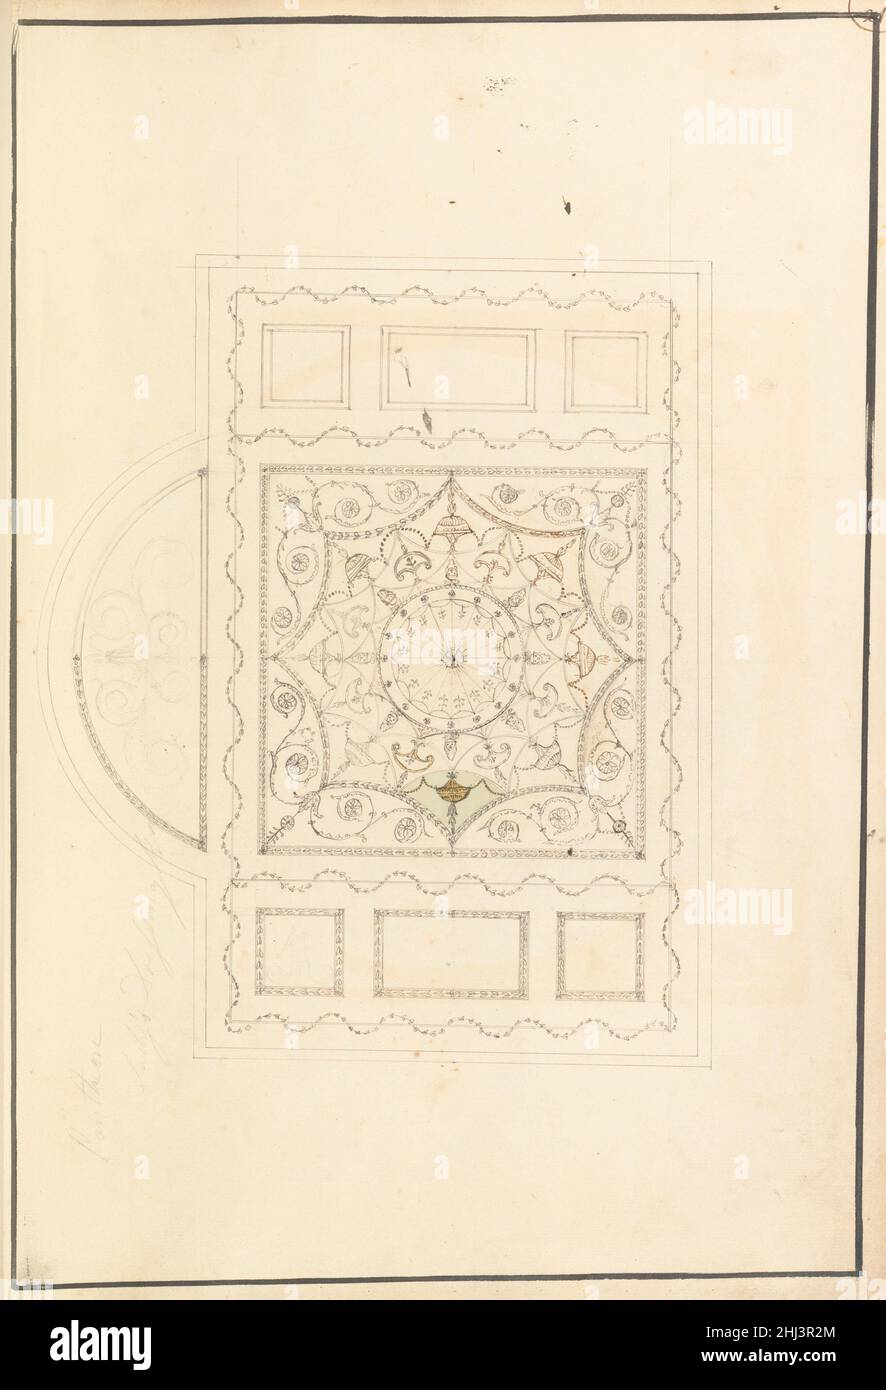 Design for Ceiling of Ladies' Dressing Room at the Pantheon, Oxford Street, London ca. 1770 James Wyatt British. Design for Ceiling of Ladies' Dressing Room at the Pantheon, Oxford Street, London  334182 Stock Photo